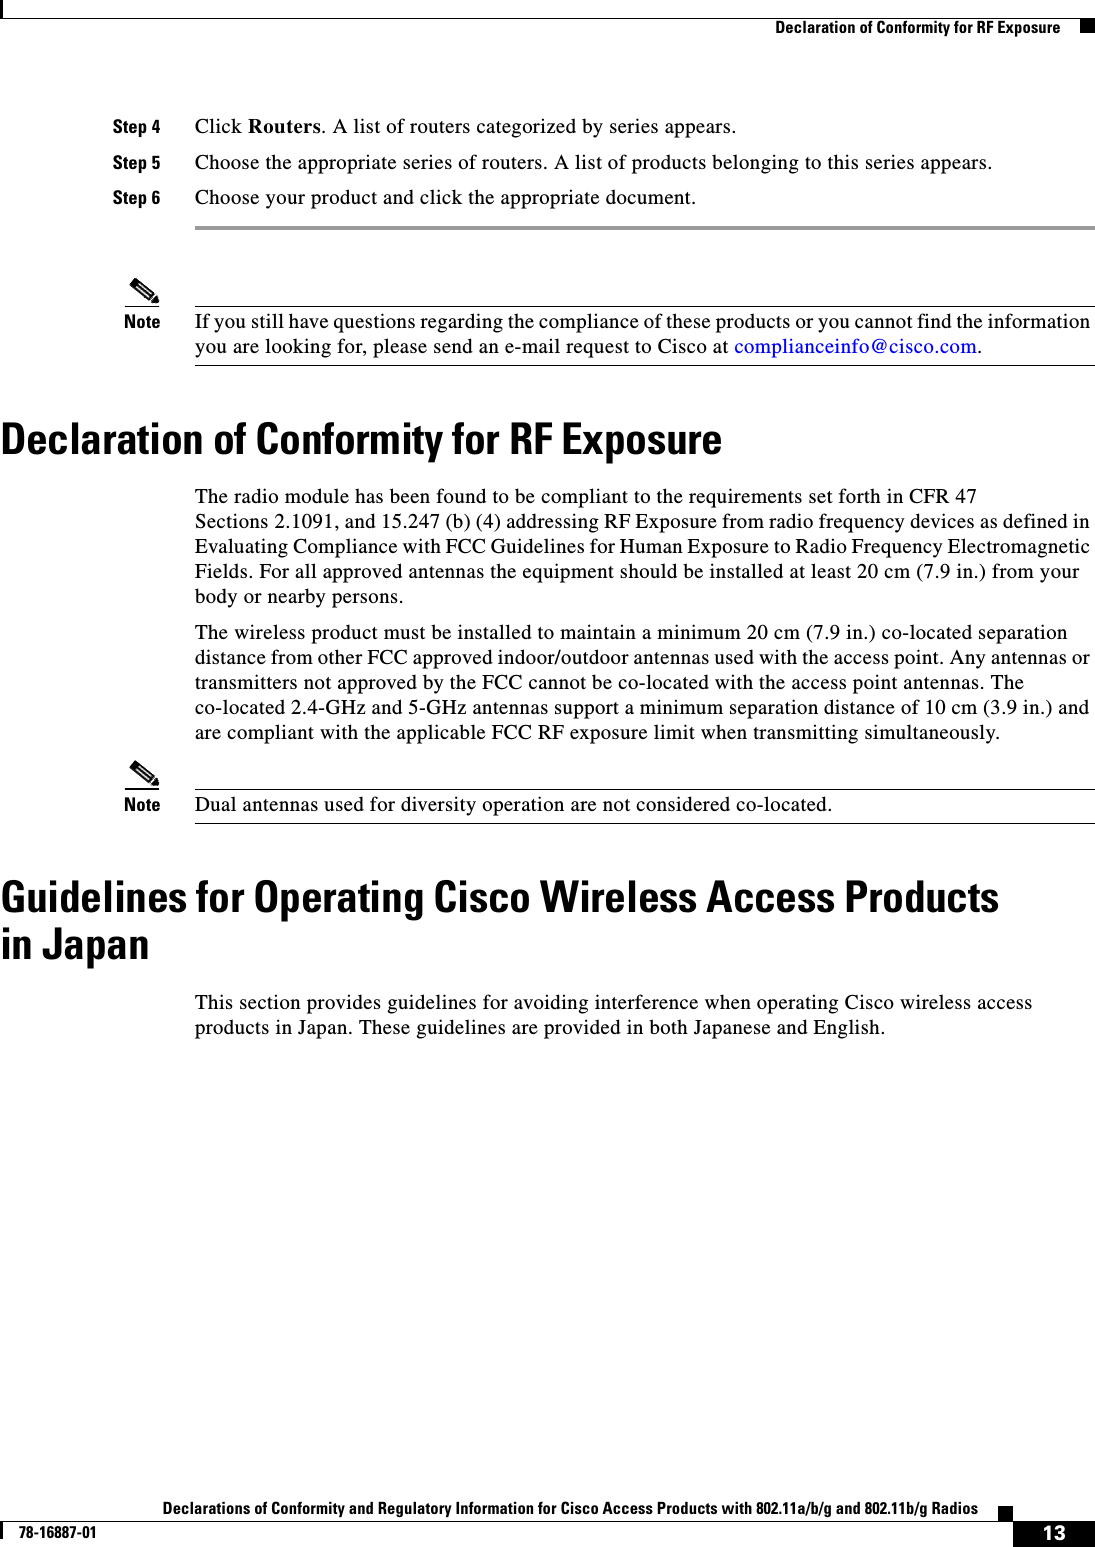  13Declarations of Conformity and Regulatory Information for Cisco Access Products with 802.11a/b/g and 802.11b/g Radios78-16887-01   Declaration of Conformity for RF ExposureStep 4 Click Routers. A list of routers categorized by series appears.Step 5 Choose the appropriate series of routers. A list of products belonging to this series appears.Step 6 Choose your product and click the appropriate document.Note If you still have questions regarding the compliance of these products or you cannot find the information you are looking for, please send an e-mail request to Cisco at complianceinfo@cisco.com.Declaration of Conformity for RF ExposureThe radio module has been found to be compliant to the requirements set forth in CFR 47 Sections 2.1091, and 15.247 (b) (4) addressing RF Exposure from radio frequency devices as defined in Evaluating Compliance with FCC Guidelines for Human Exposure to Radio Frequency Electromagnetic Fields. For all approved antennas the equipment should be installed at least 20 cm (7.9 in.) from your body or nearby persons. The wireless product must be installed to maintain a minimum 20 cm (7.9 in.) co-located separation distance from other FCC approved indoor/outdoor antennas used with the access point. Any antennas or transmitters not approved by the FCC cannot be co-located with the access point antennas. The co-located 2.4-GHz and 5-GHz antennas support a minimum separation distance of 10 cm (3.9 in.) and are compliant with the applicable FCC RF exposure limit when transmitting simultaneously.Note Dual antennas used for diversity operation are not considered co-located.Guidelines for Operating Cisco Wireless Access Products in JapanThis section provides guidelines for avoiding interference when operating Cisco wireless access products in Japan. These guidelines are provided in both Japanese and English.